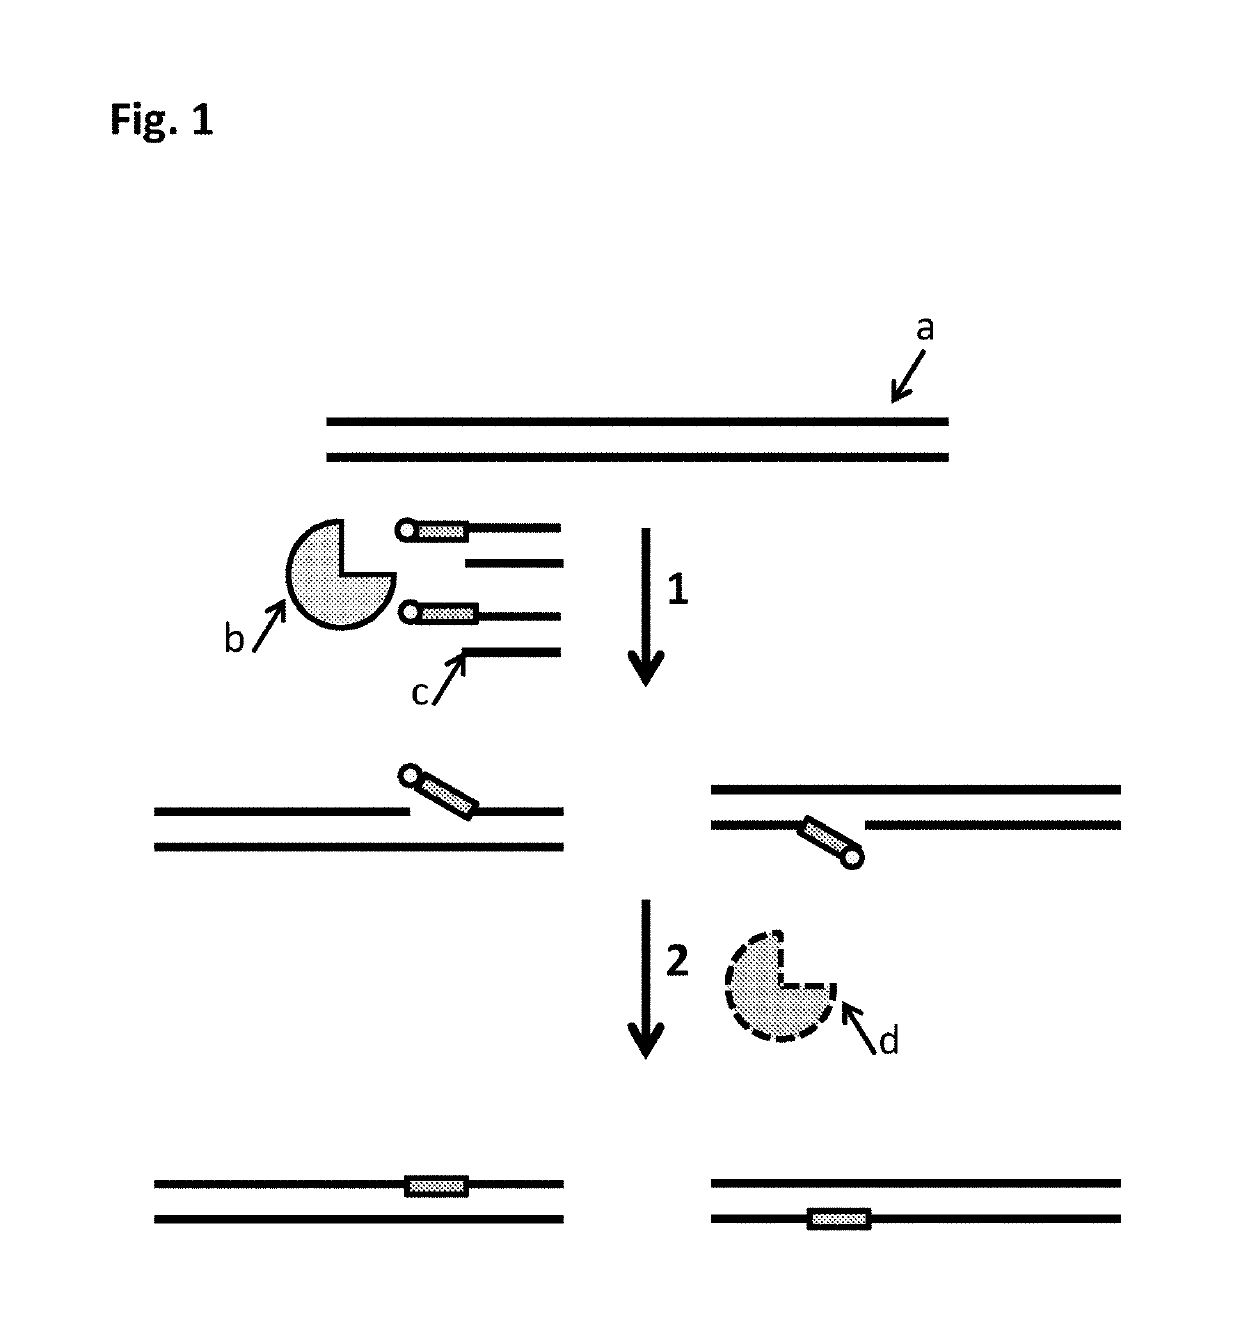 Polynucleotide modification methods